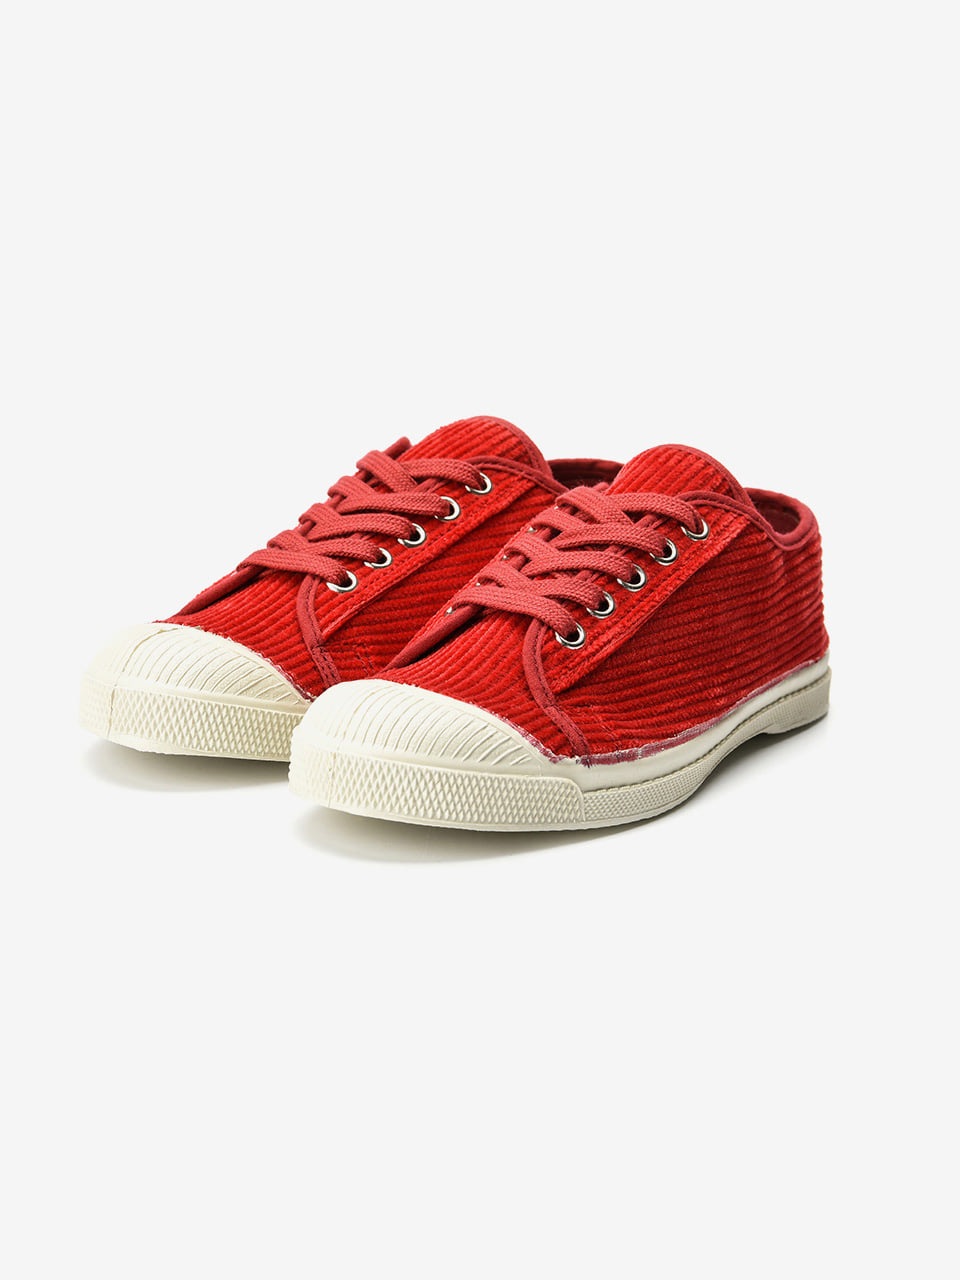 LIMITED ROMY CORDUROY - RED